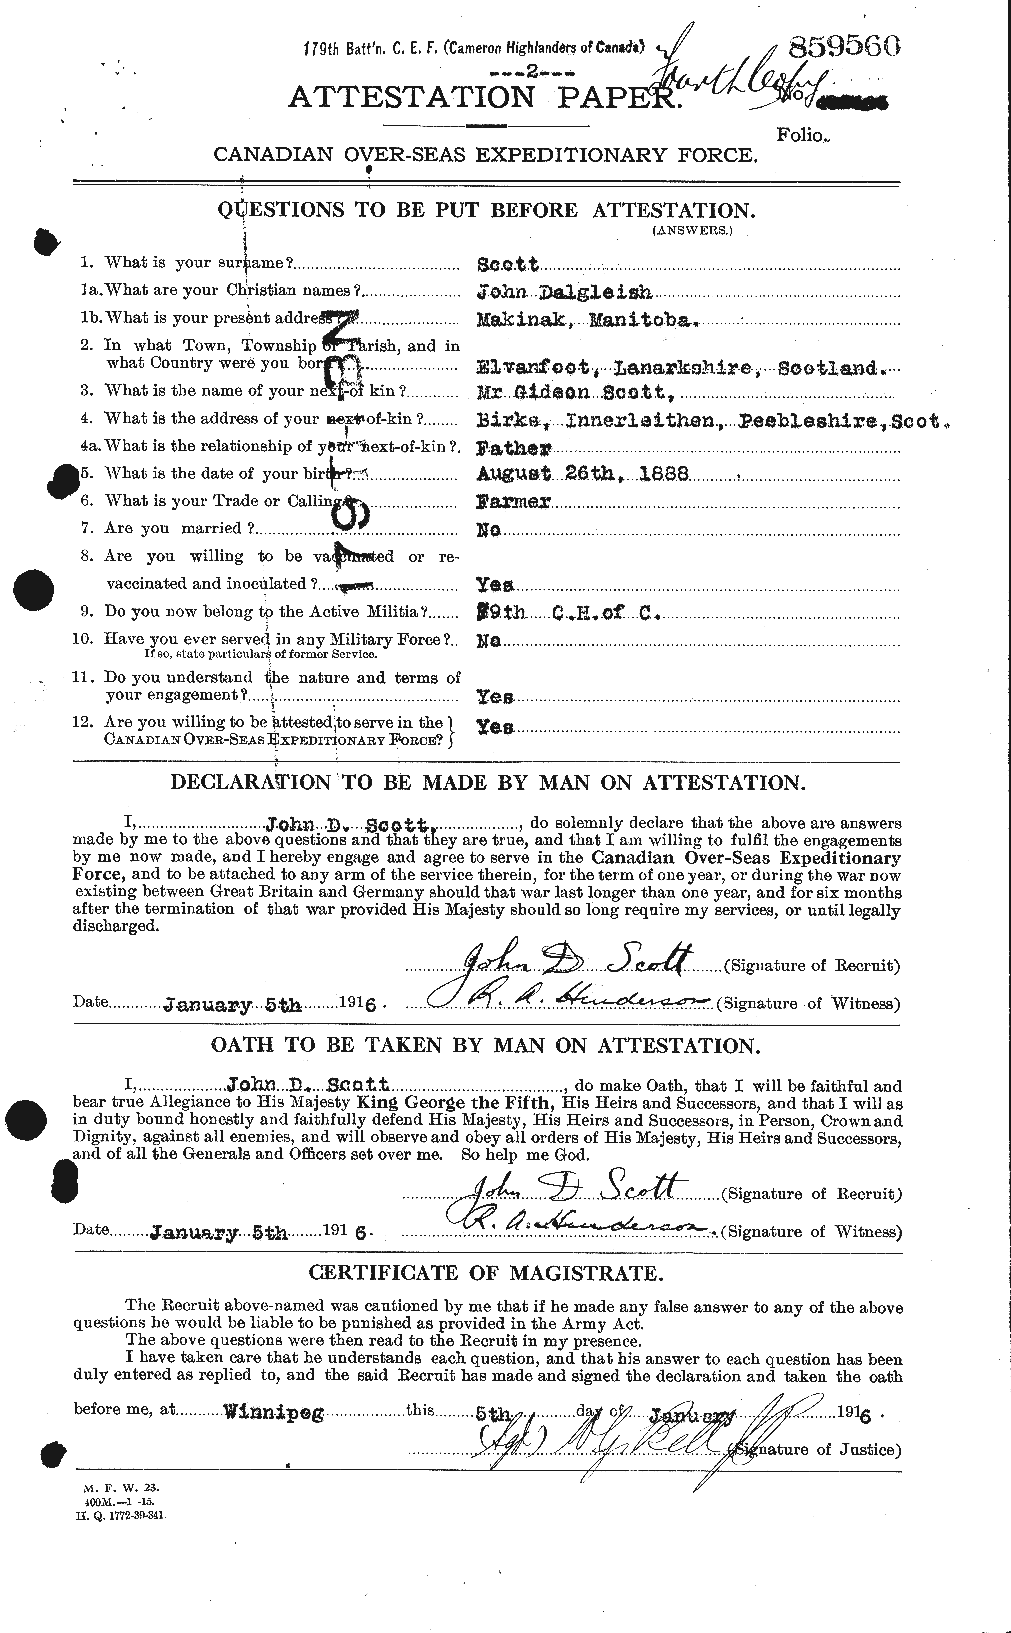 Personnel Records of the First World War - CEF 084644a